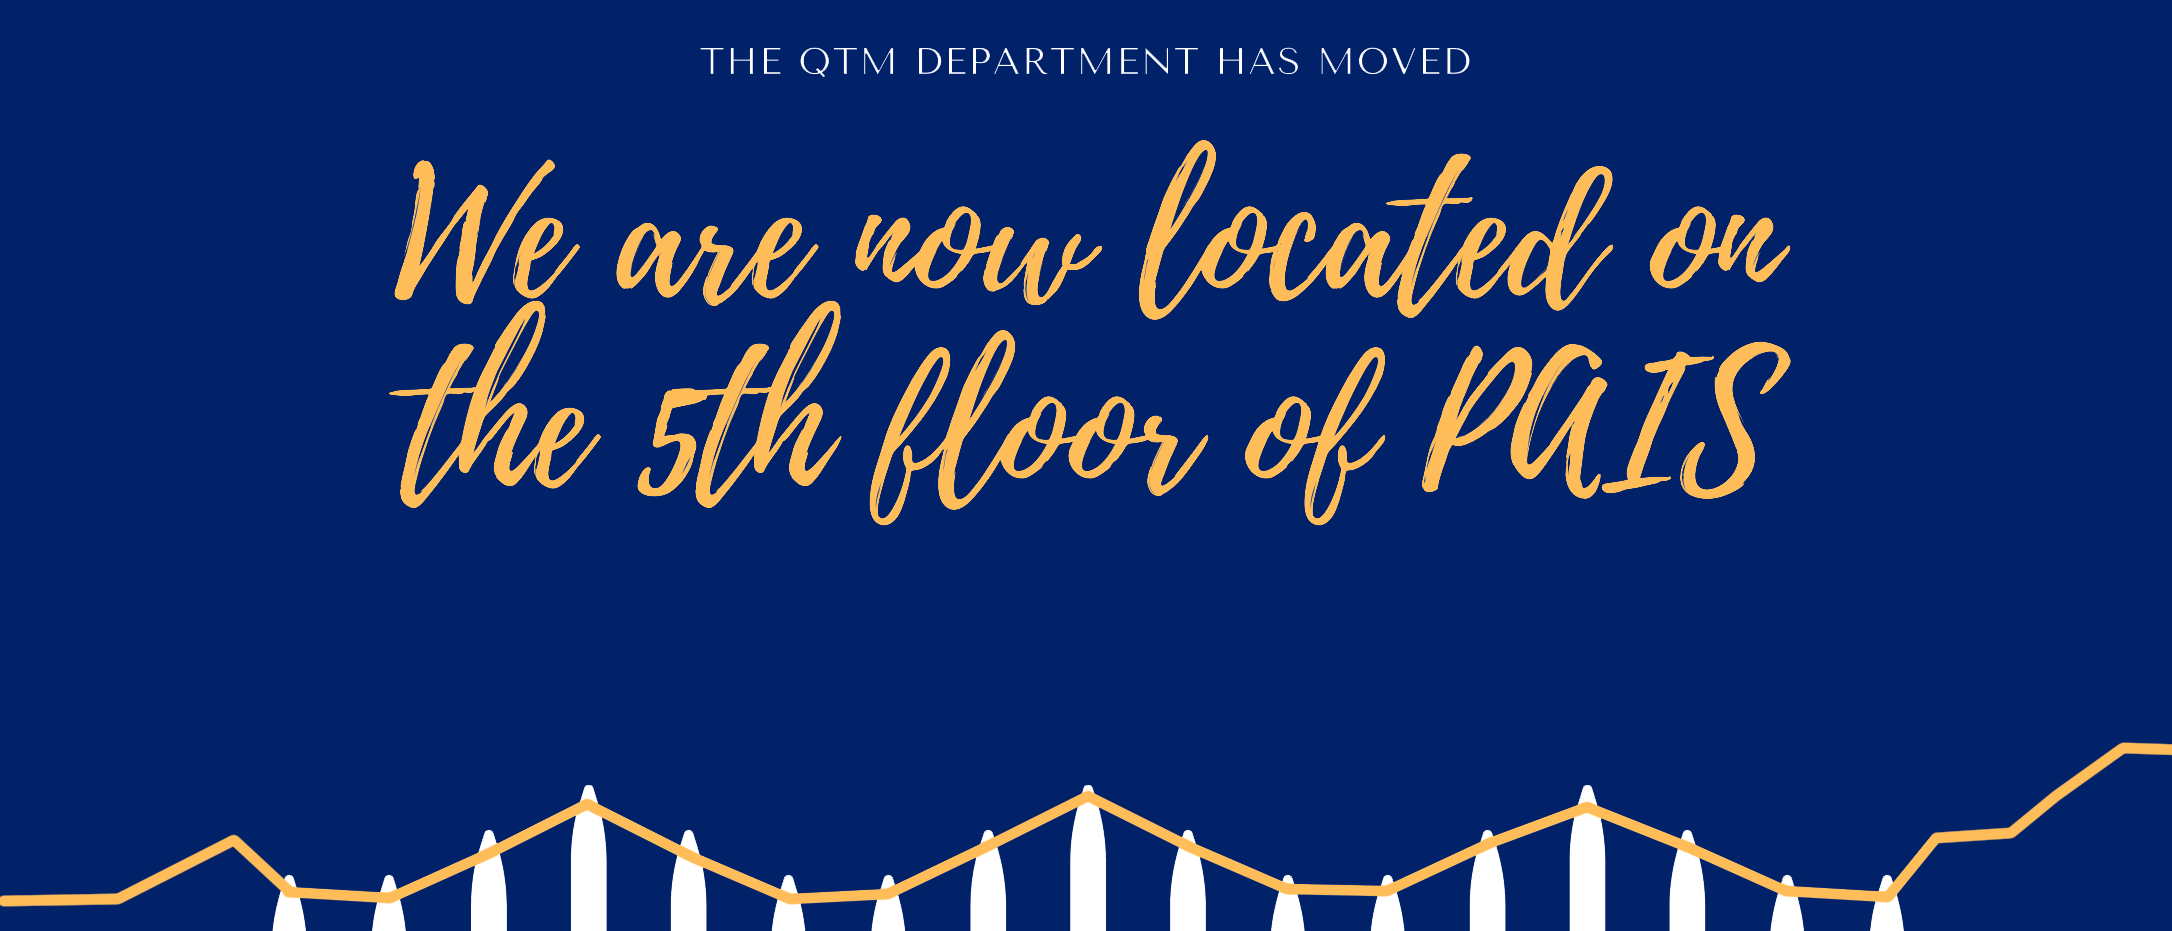 The QTM department has moved to the 5th floor of PAIS